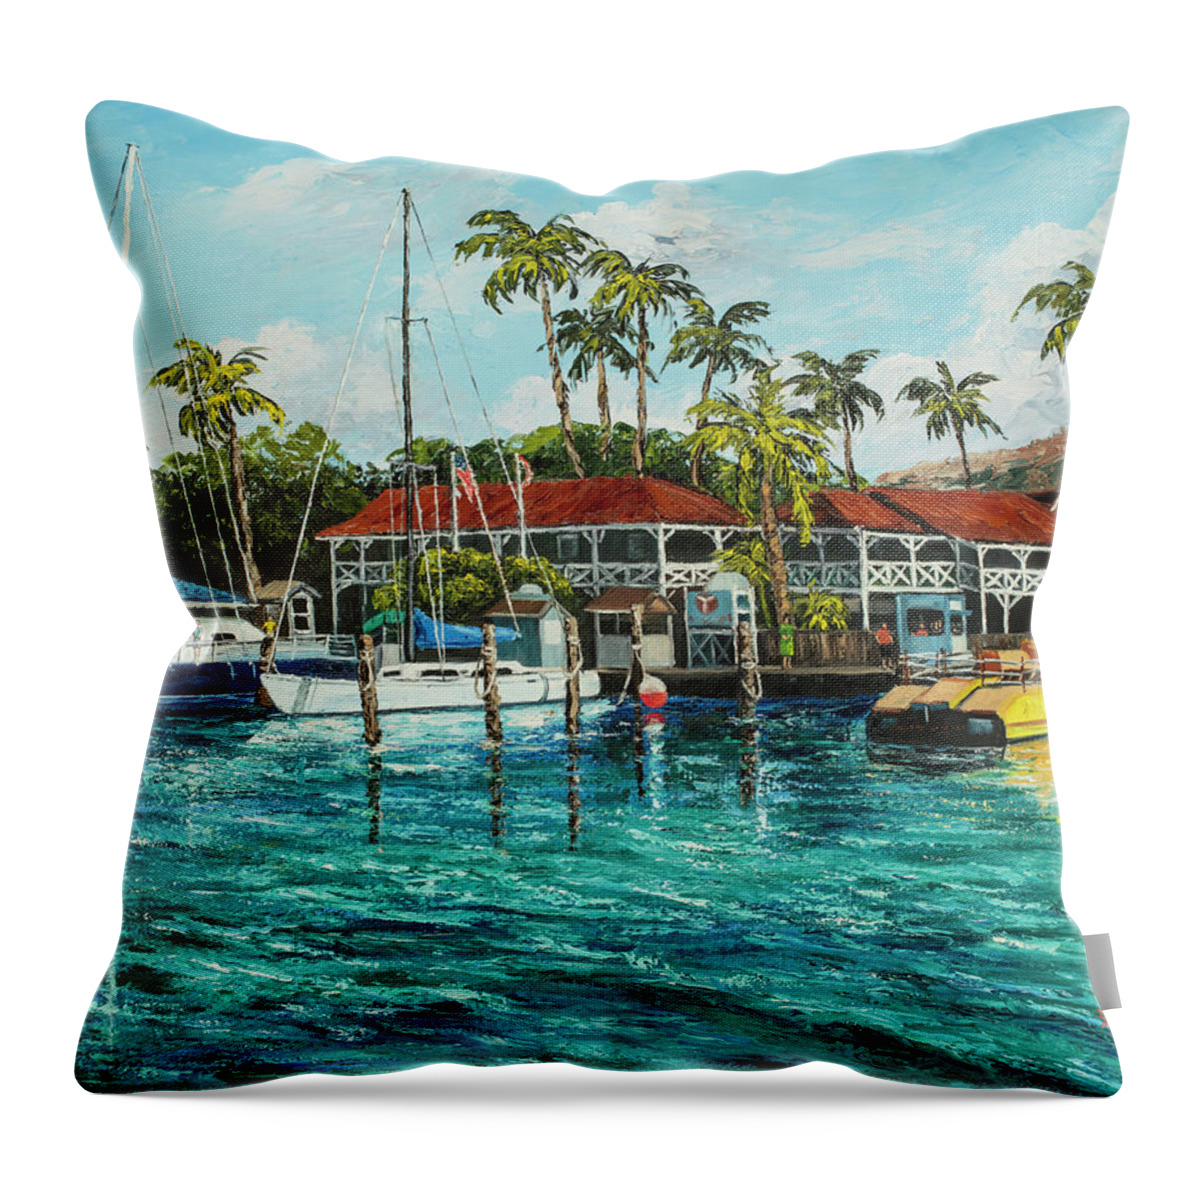 Lahaina Throw Pillow featuring the painting Reef Dancer by Darice Machel McGuire